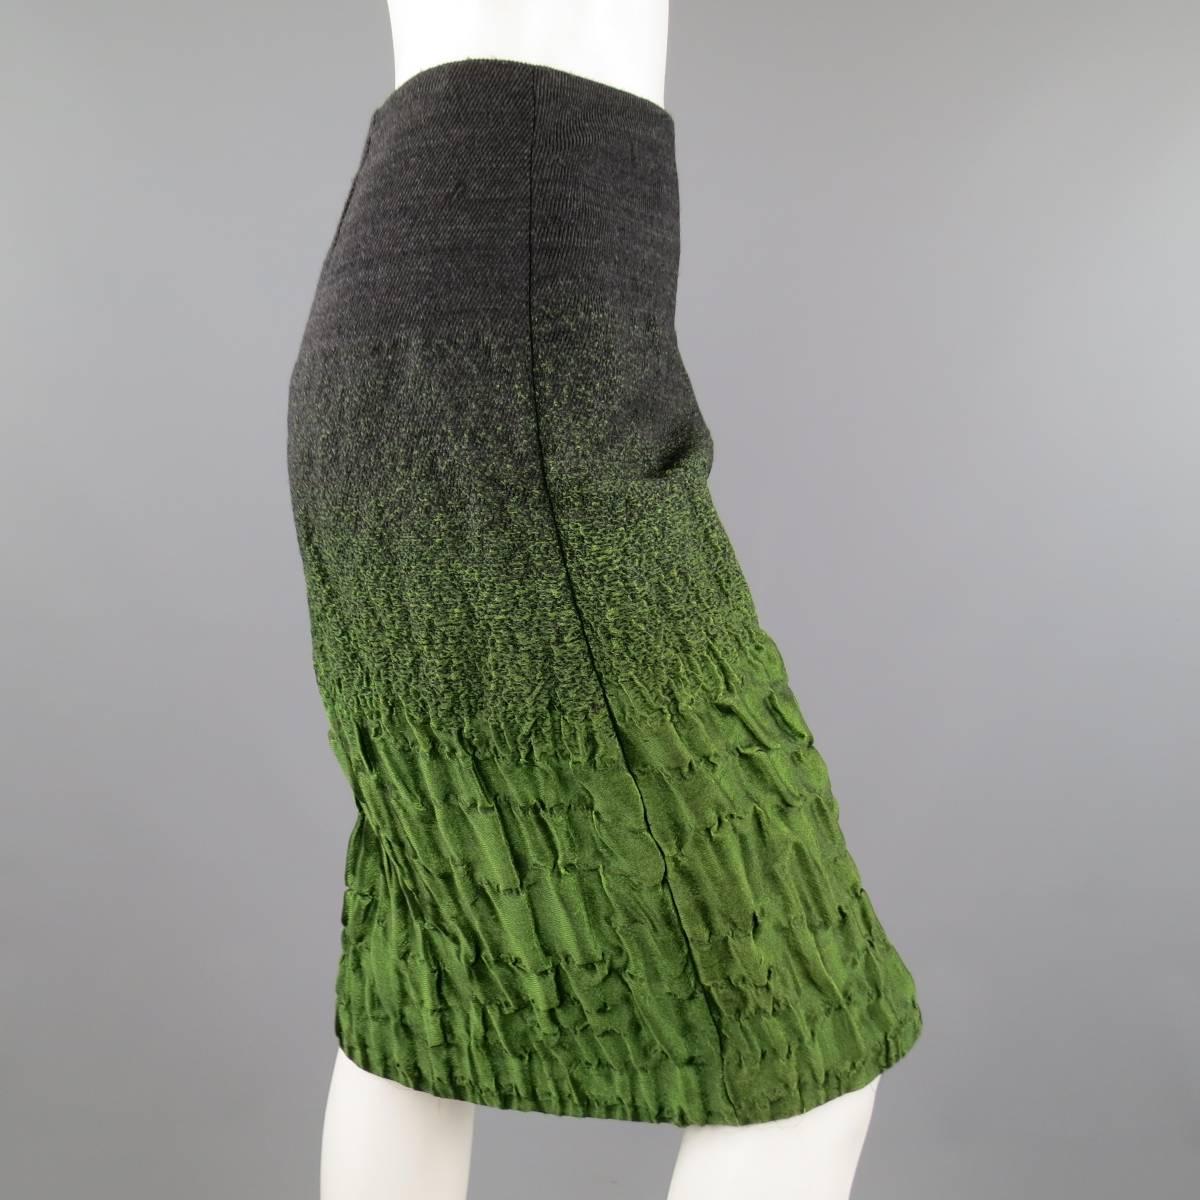 Gray PRADA Size 10 Charcoal & Green Ombre Gradient Textured Fall 2007 Skirt